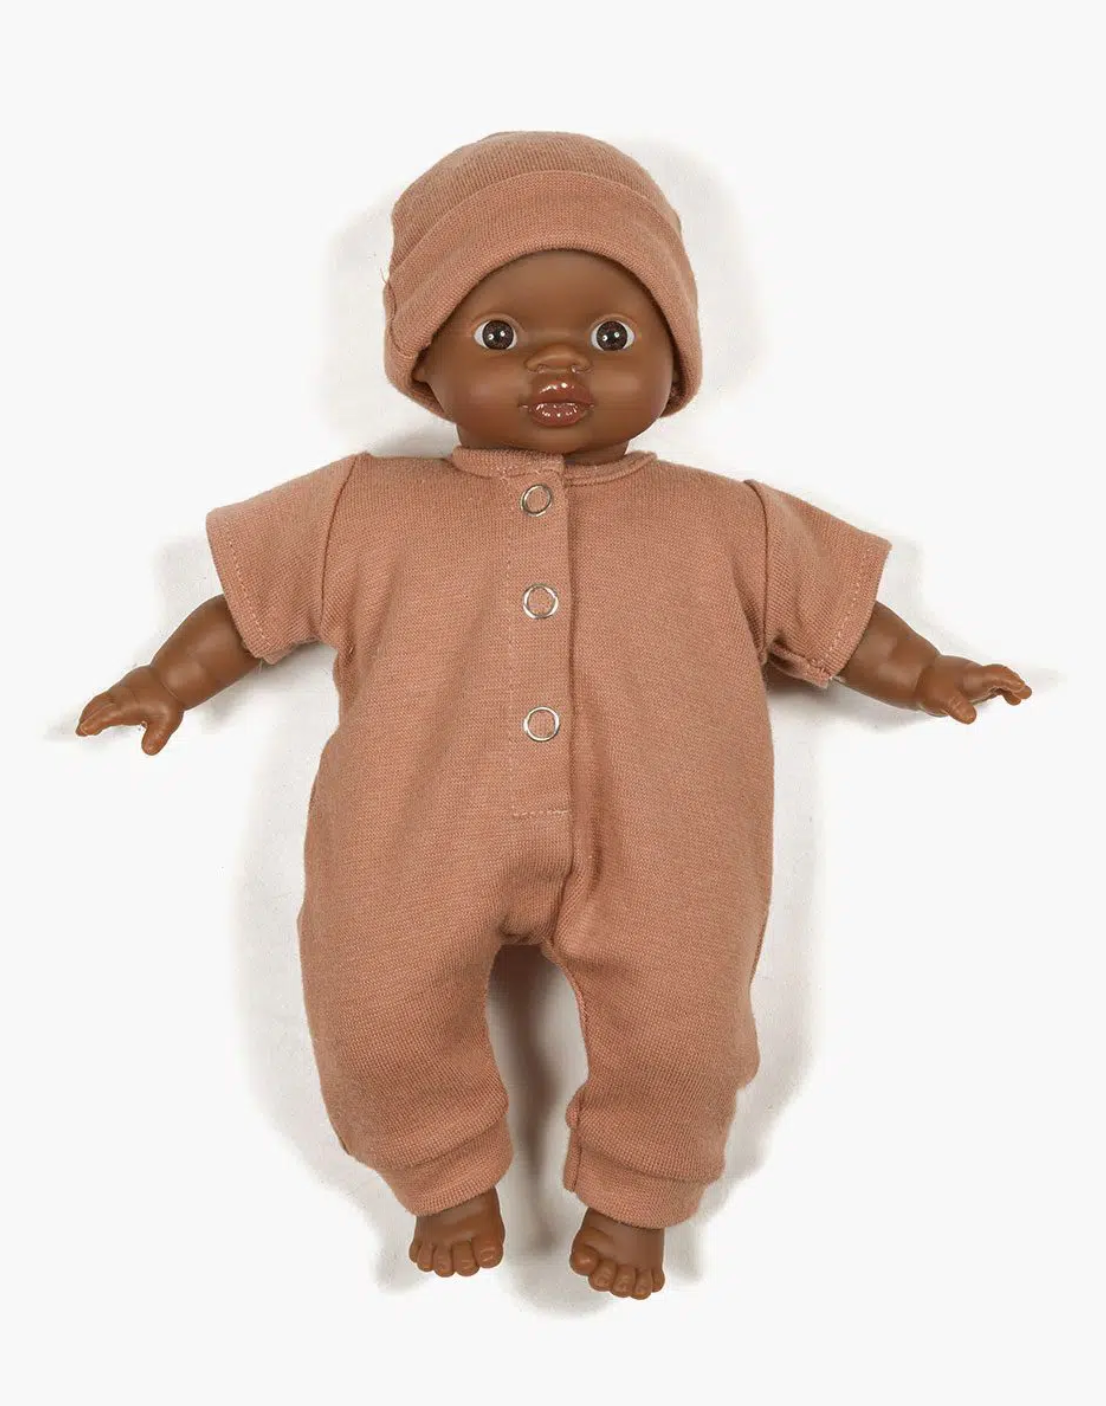 Lili Set with Cap in "Terracotta" for Minikane Soft-bodied Babies